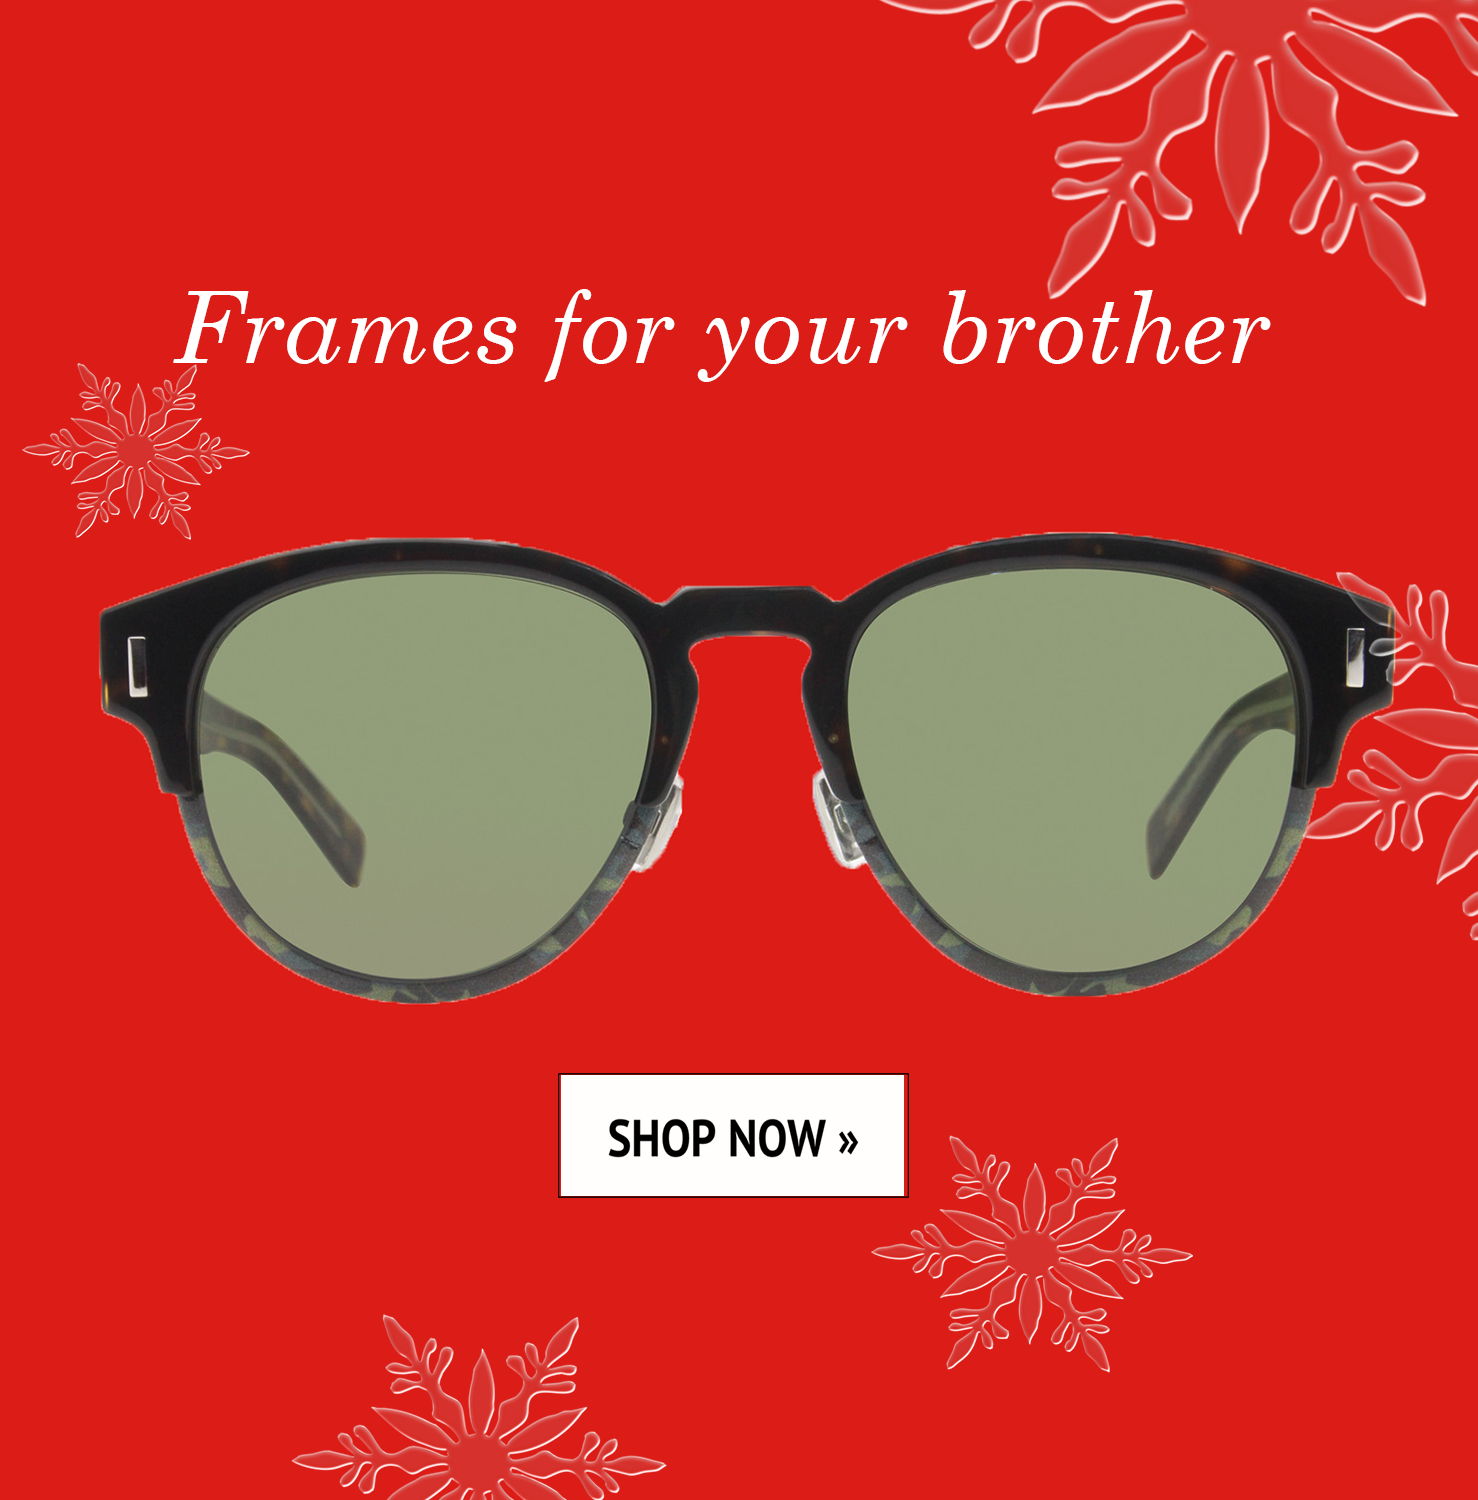 Frames for your brother